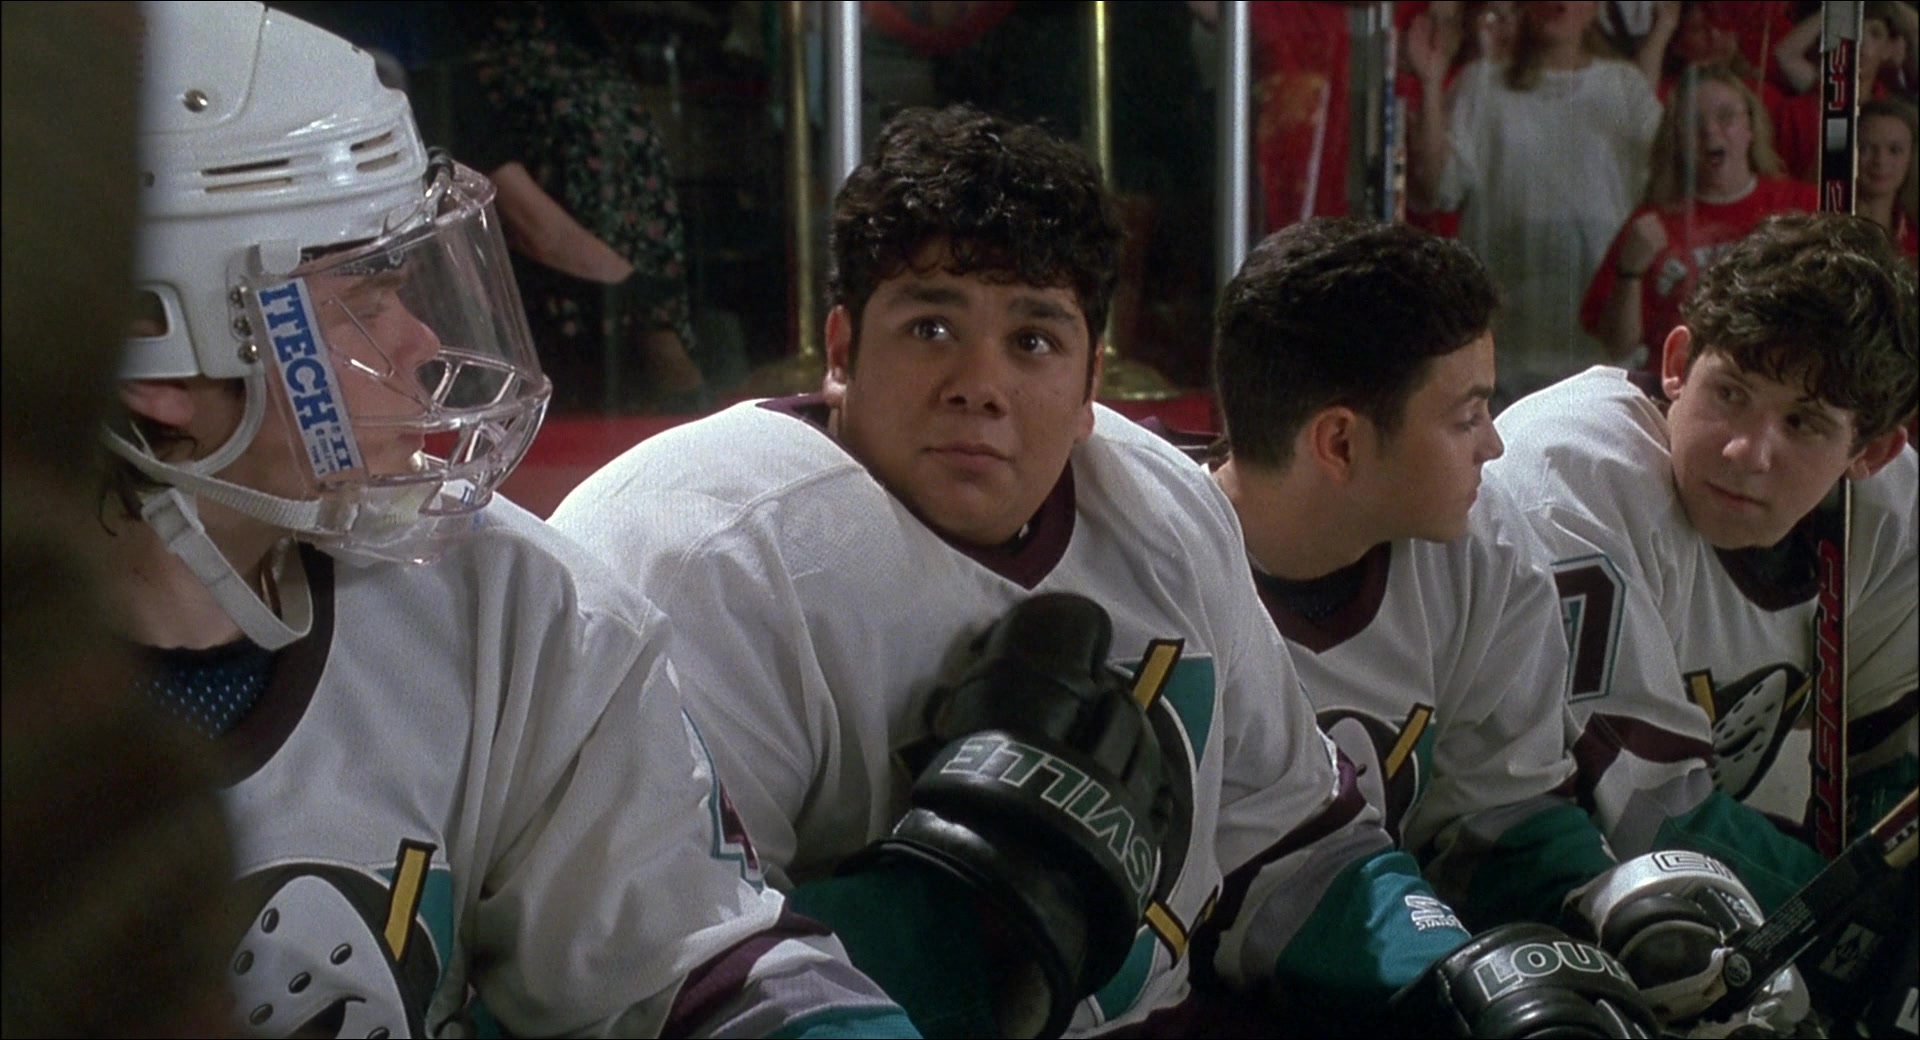 TPS Louisville Hockey Gloves Of Shaun Weiss As Greg In D3: The Mighty ...